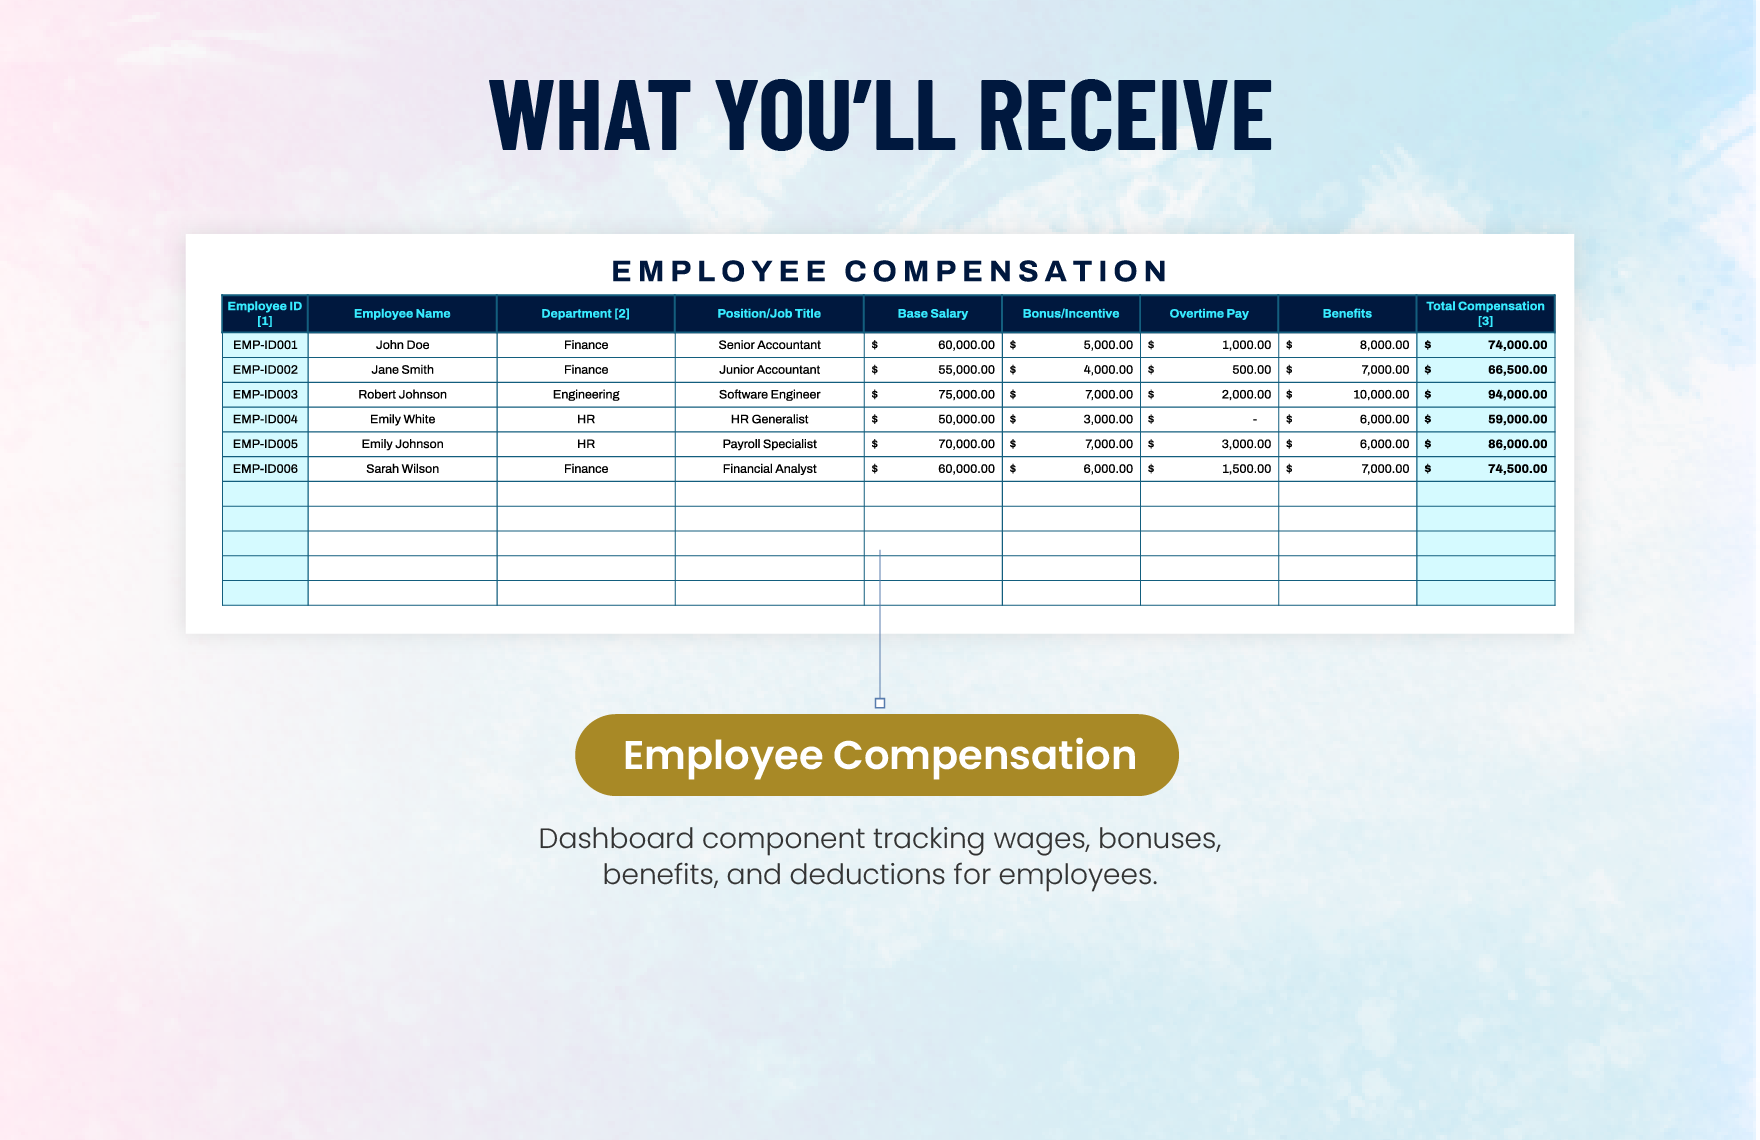 Accounting Employee Compensation Tracking Template